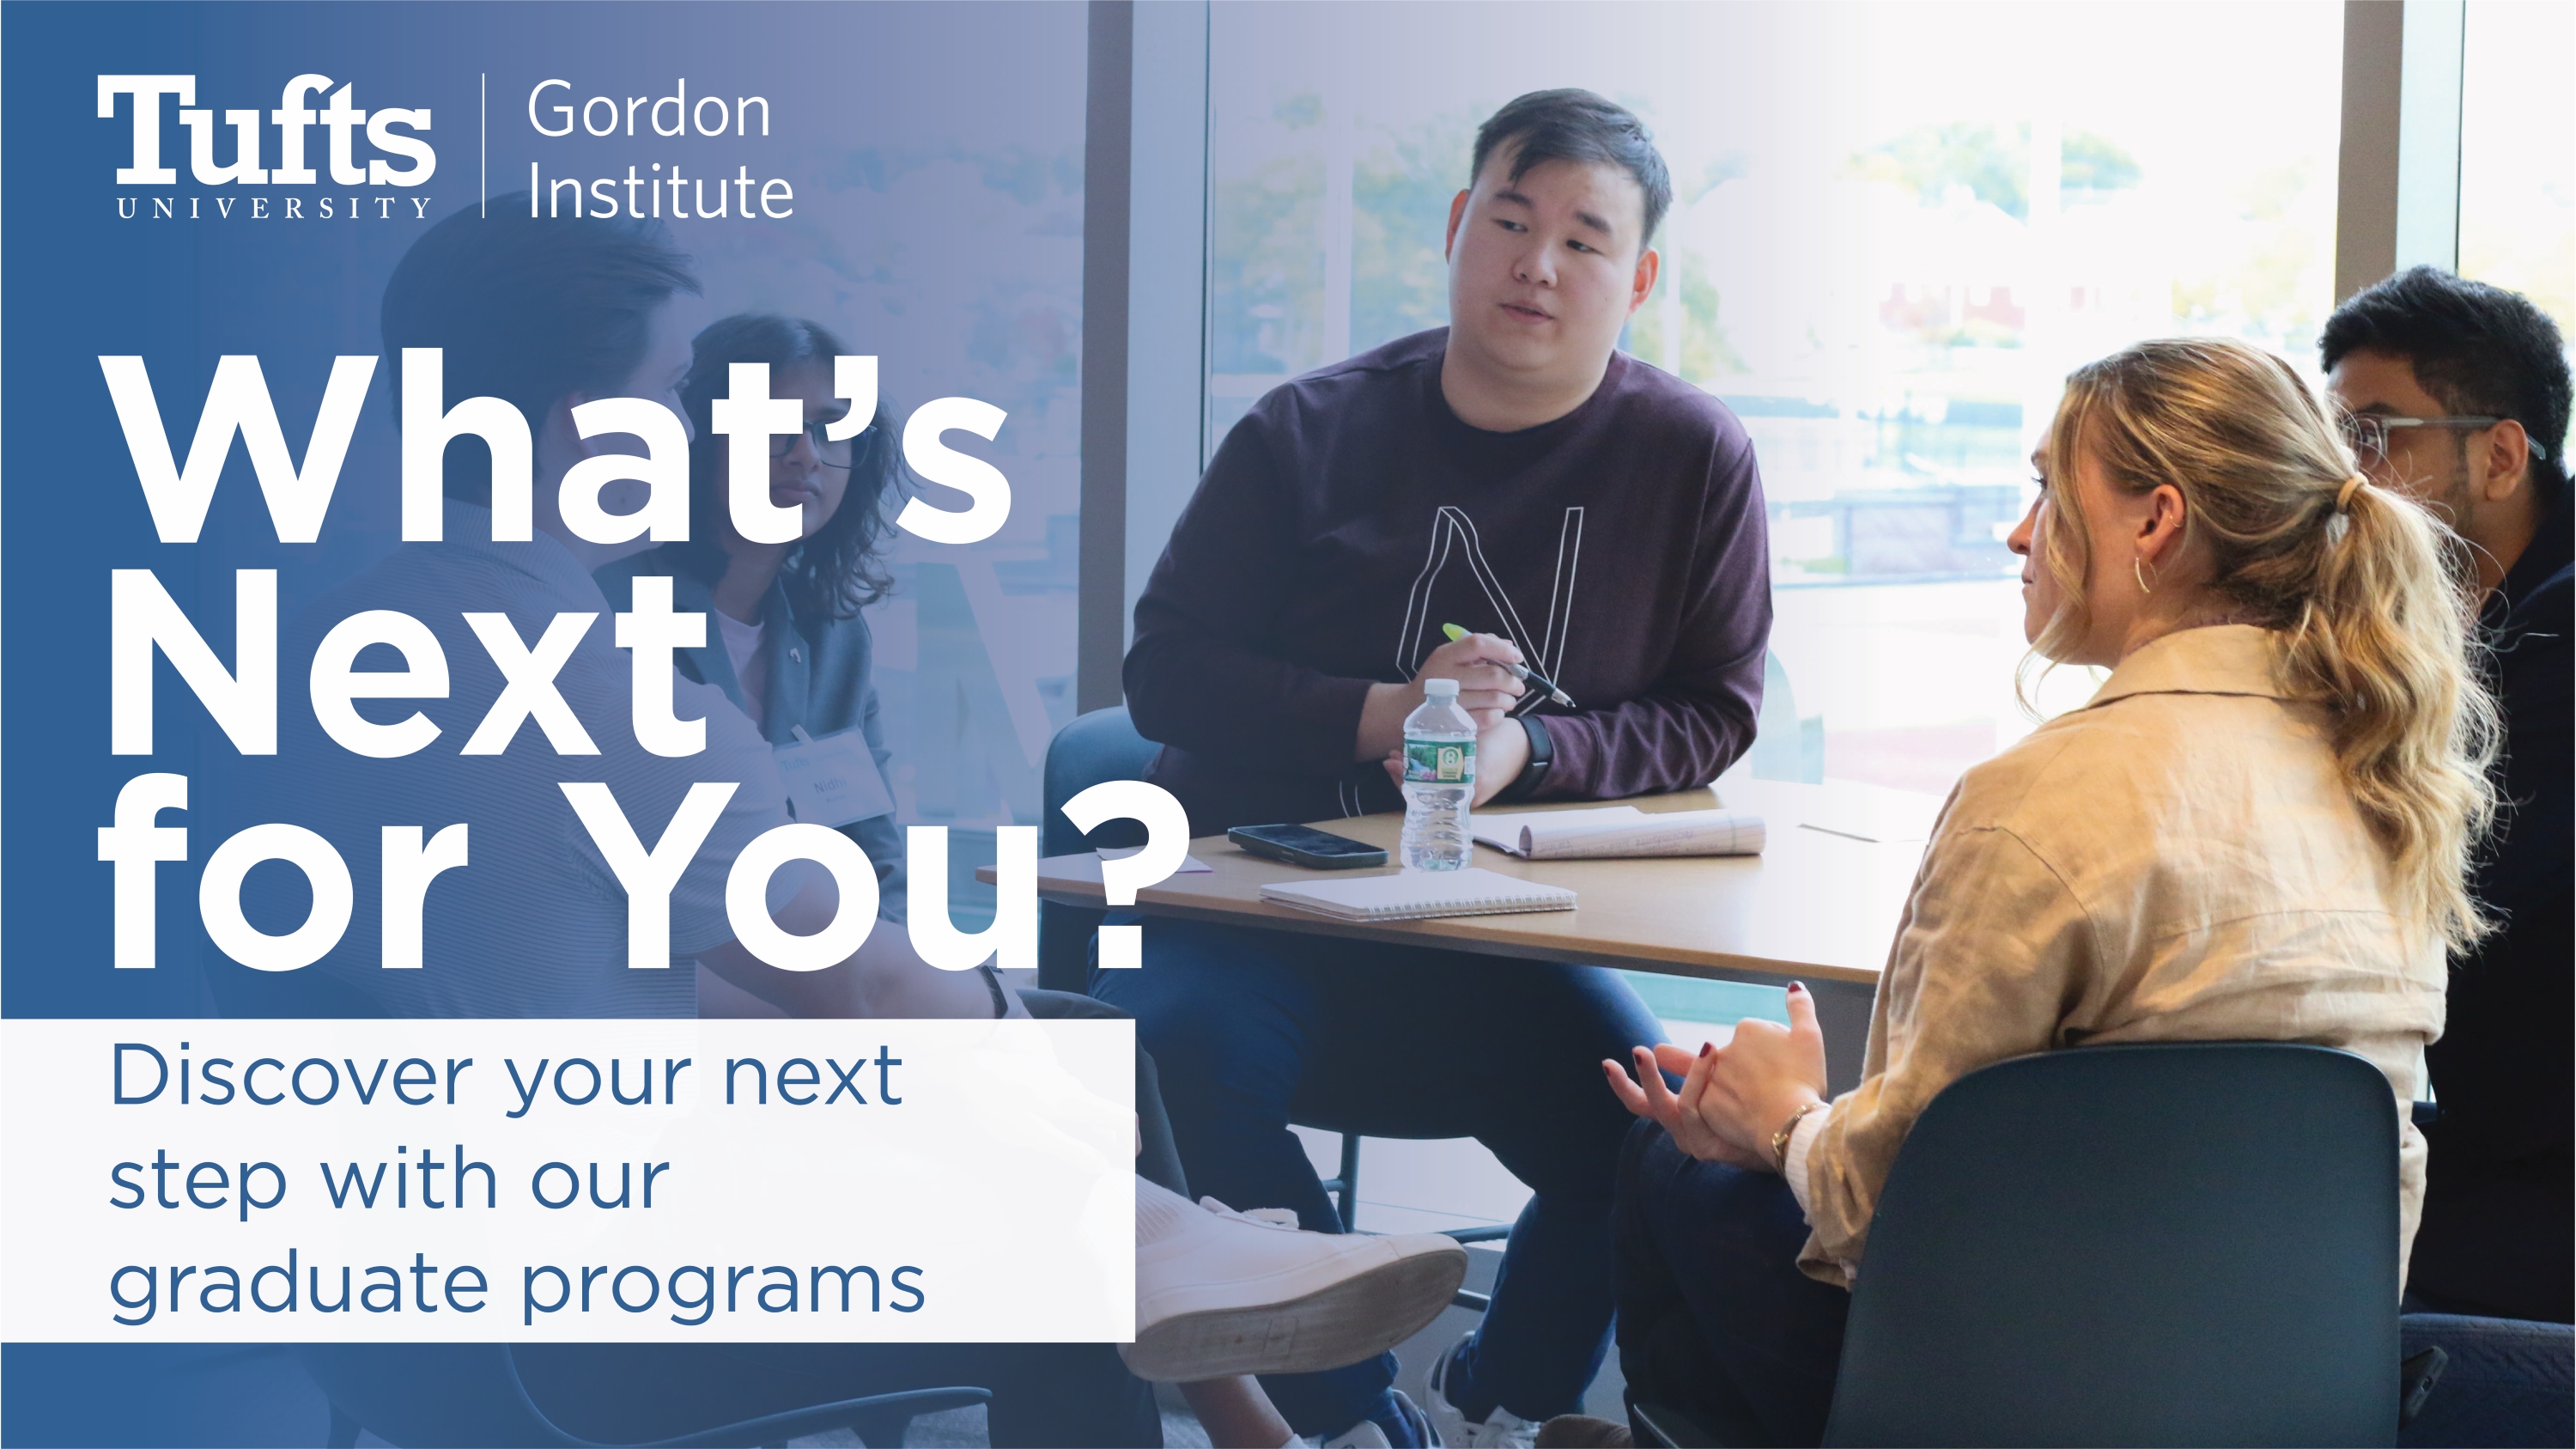 What's next for you? Discover your next step with our graduate programs